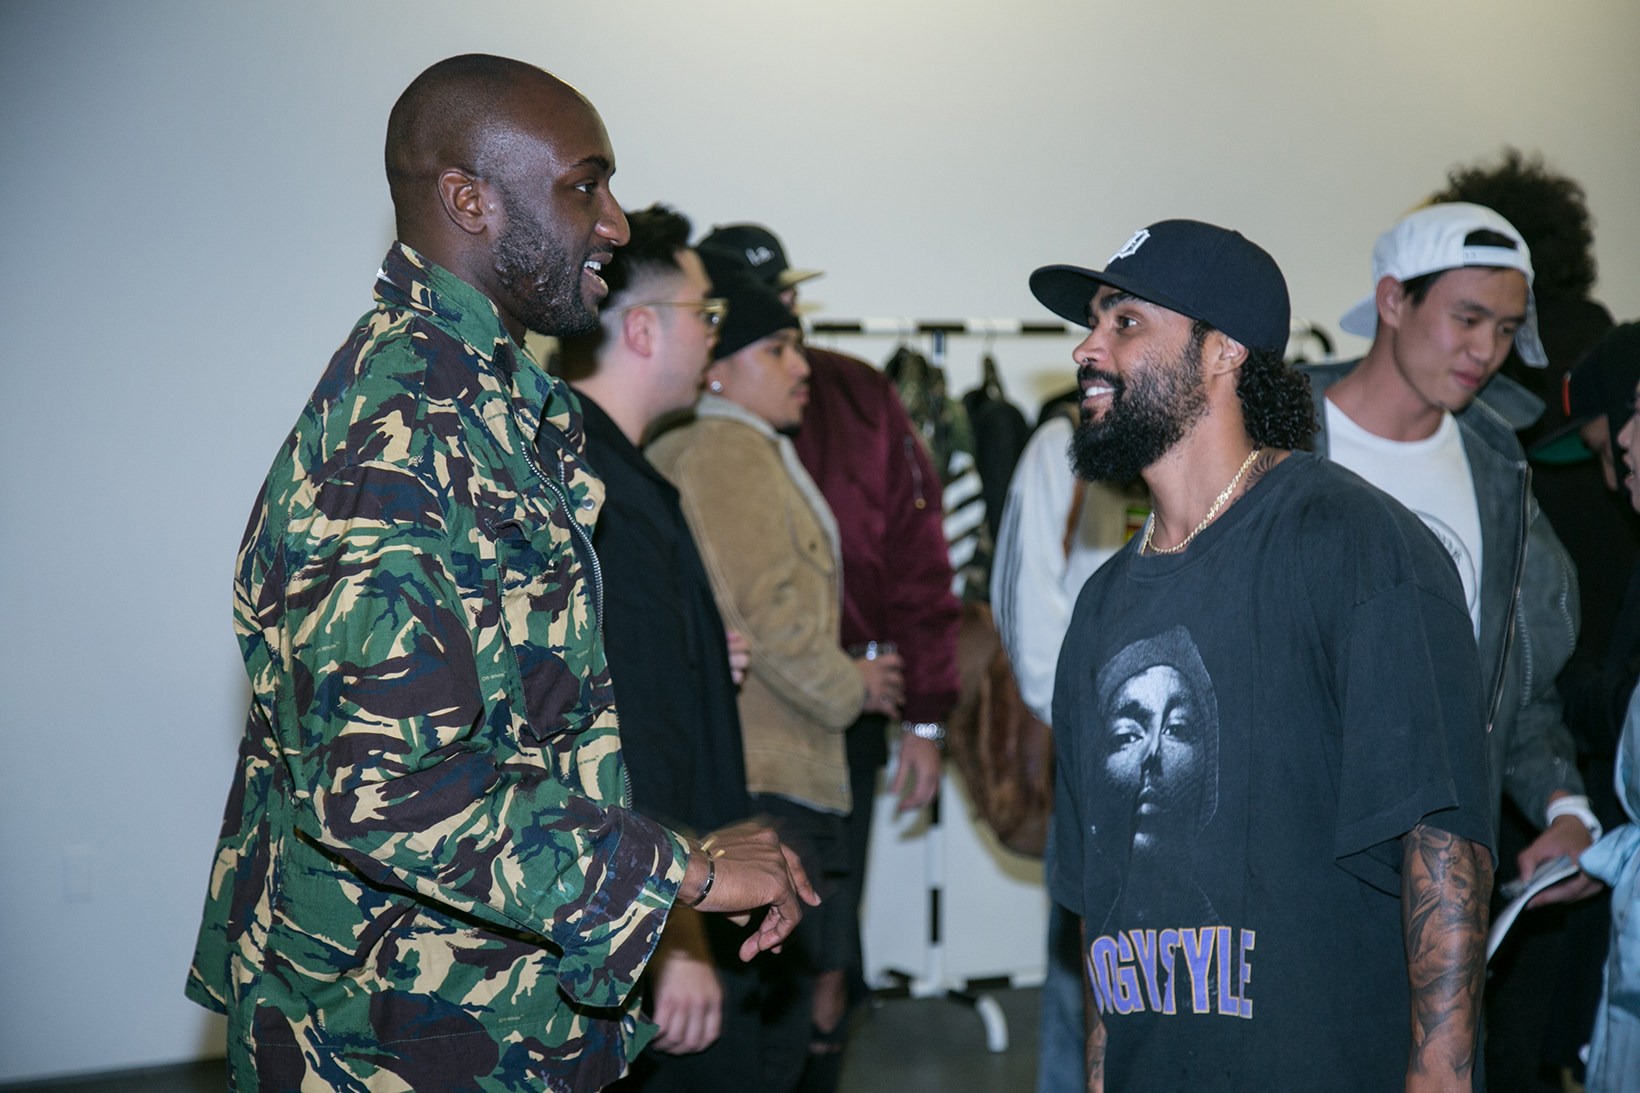 off-white-pop-up-maxfield-photographs-pause21